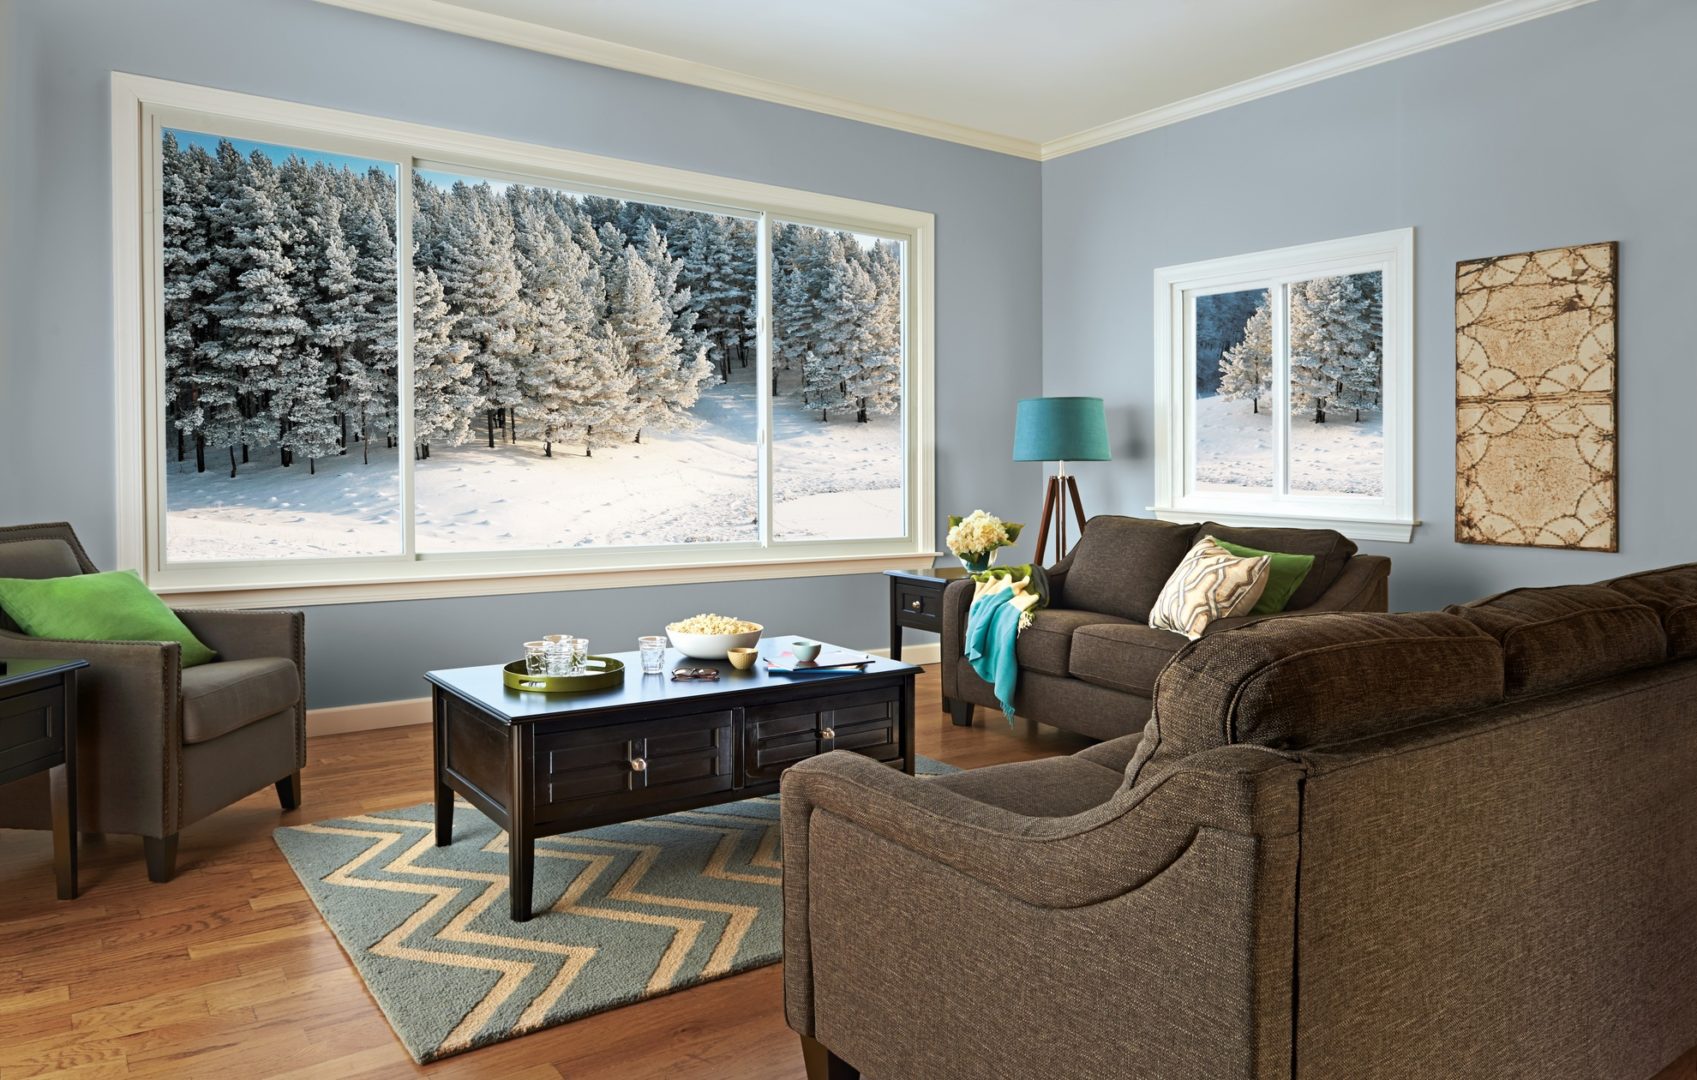 Cozy living room with wood flooring, plush brown seating, and large sliding windows overlooking frozen tundra.